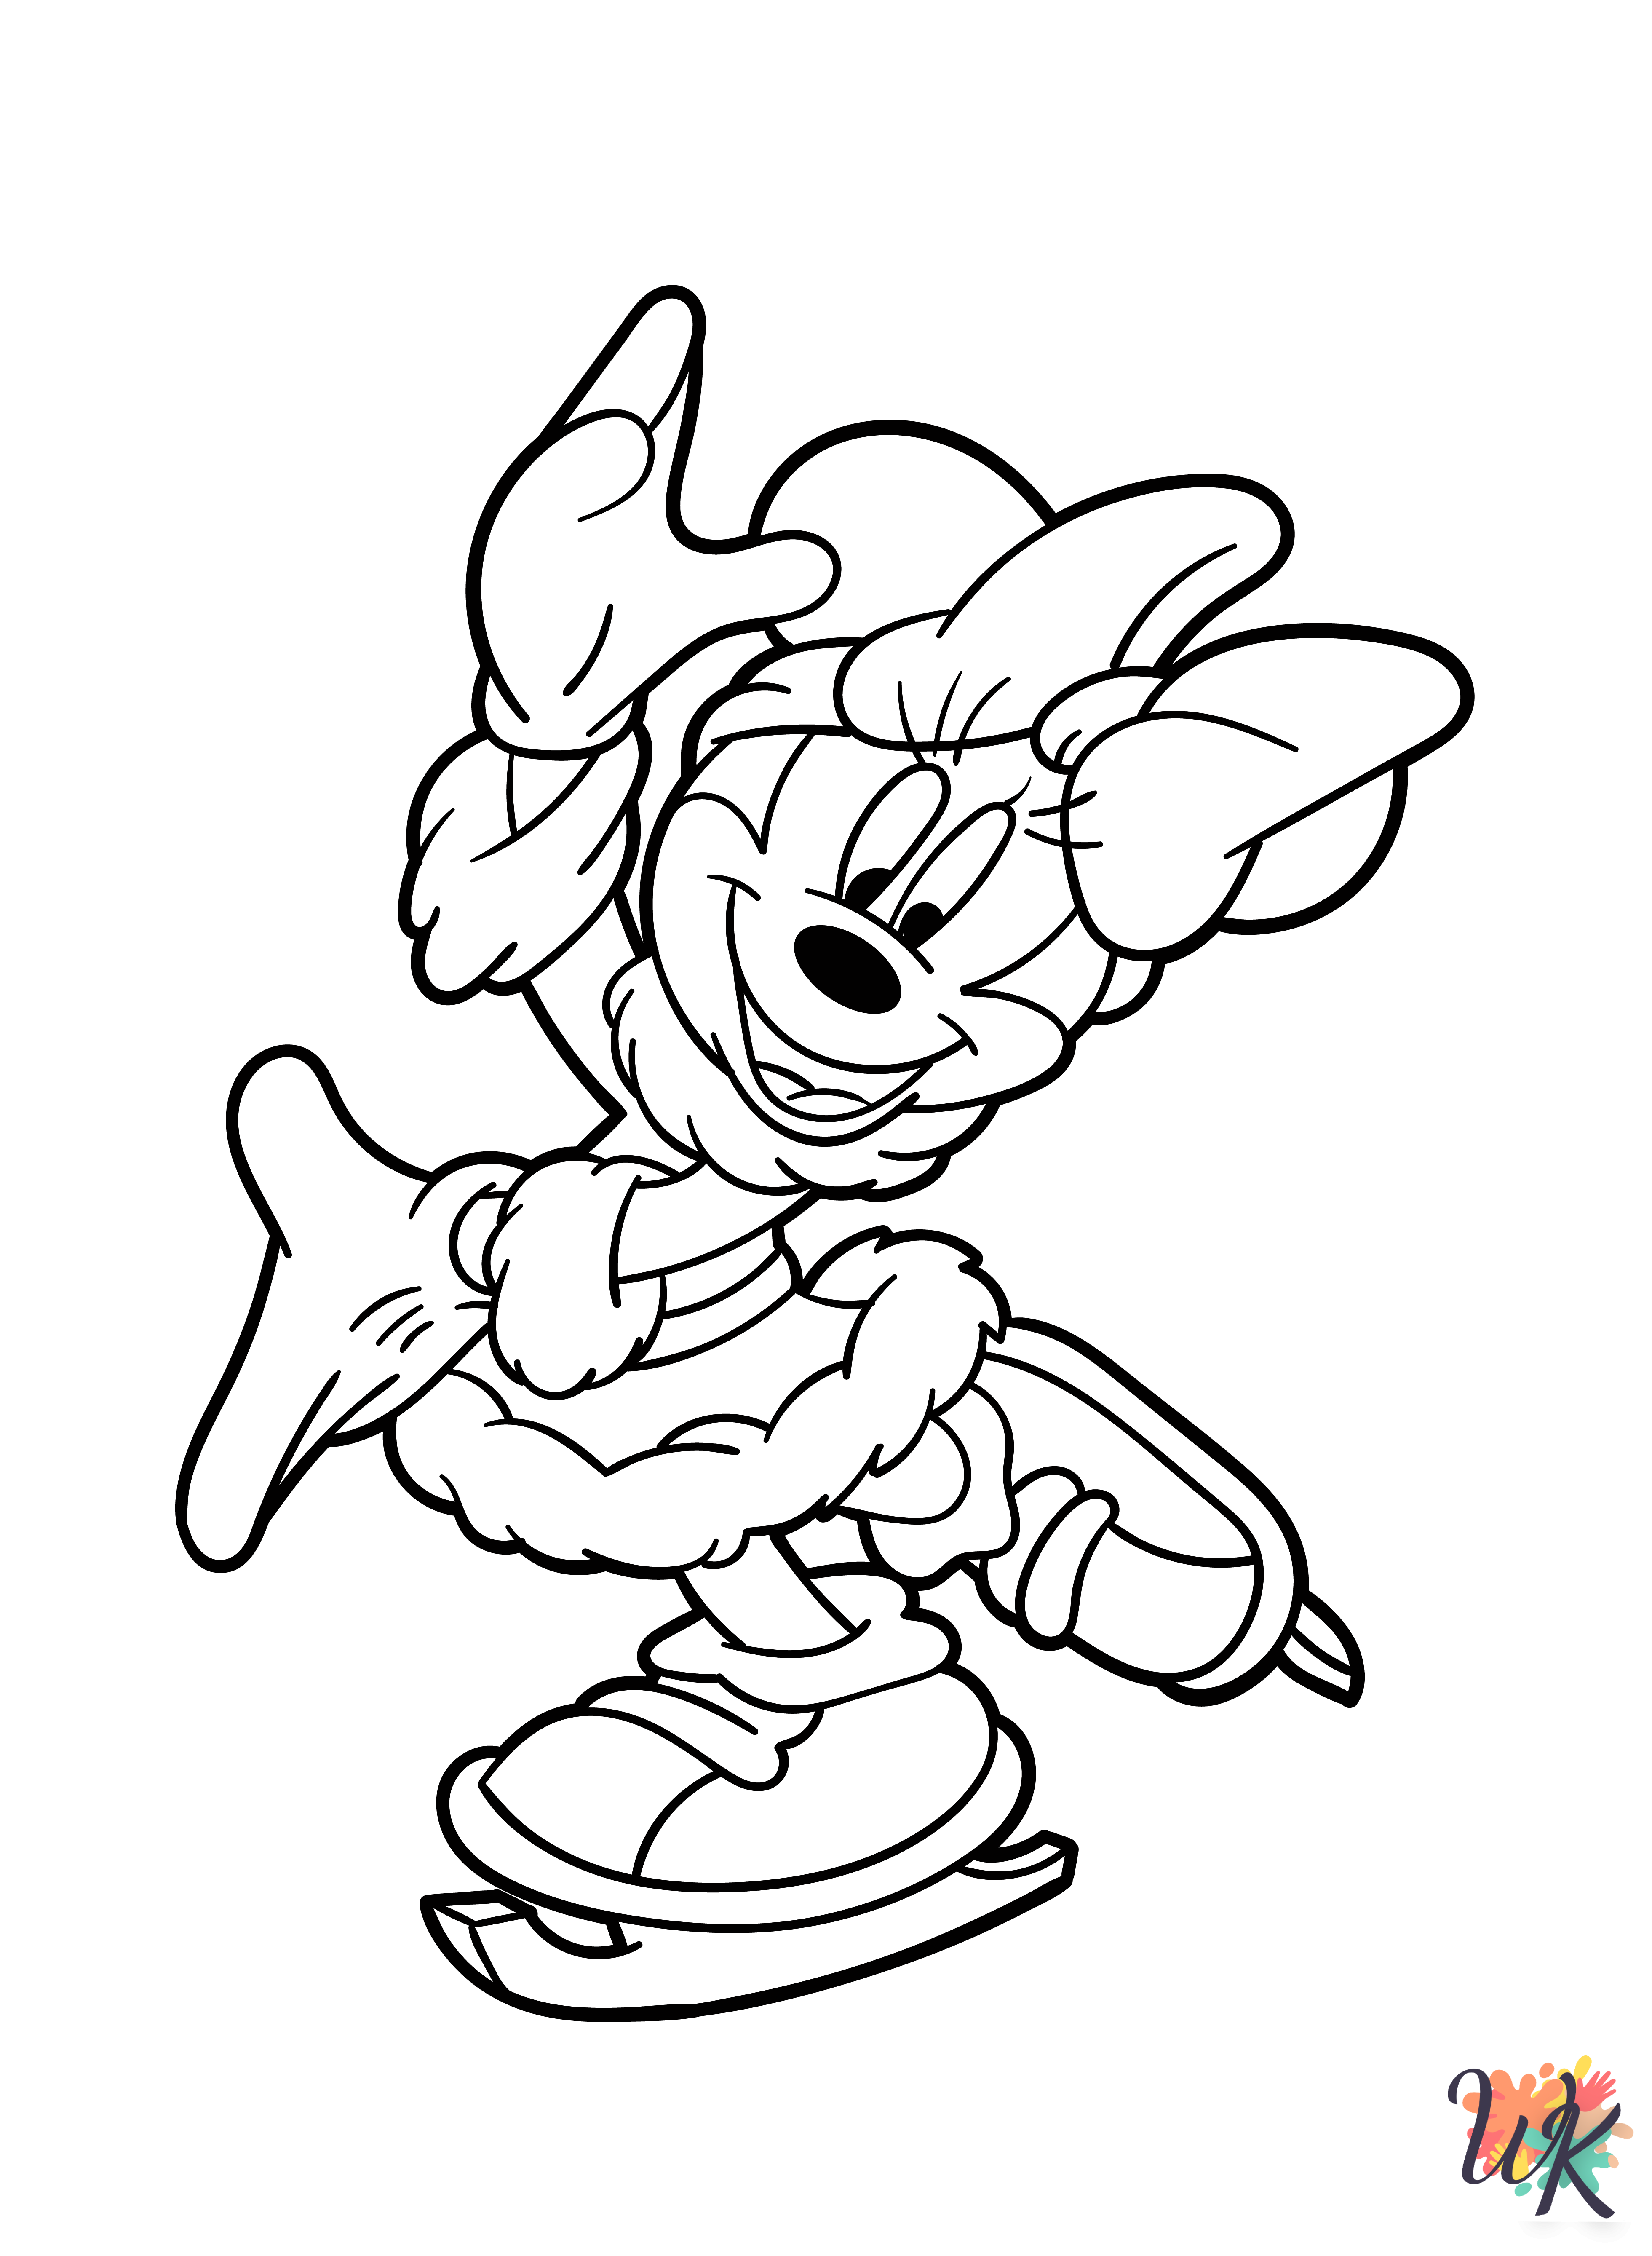 Minnie Mouse coloring pages printable free